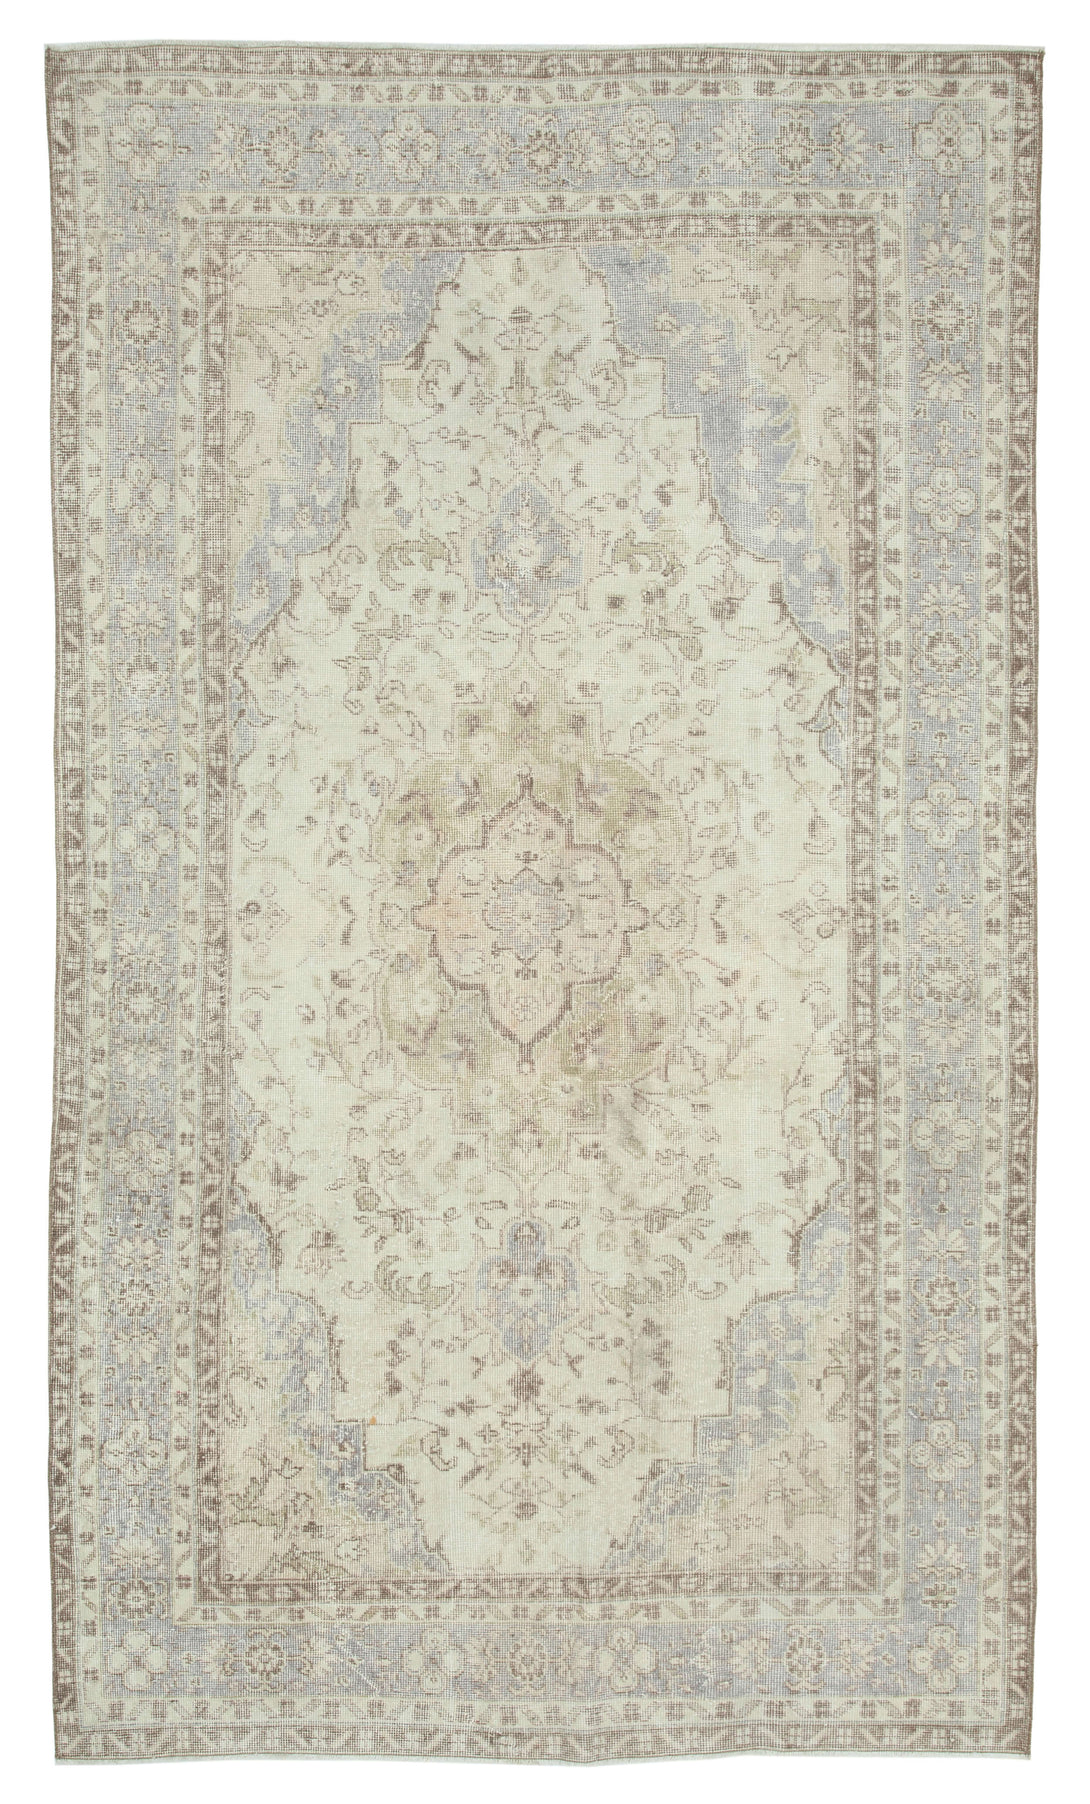 Handmade White Wash Area Rug > Design# OL-AC-25006 > Size: 5'-5" x 9'-11", Carpet Culture Rugs, Handmade Rugs, NYC Rugs, New Rugs, Shop Rugs, Rug Store, Outlet Rugs, SoHo Rugs, Rugs in USA